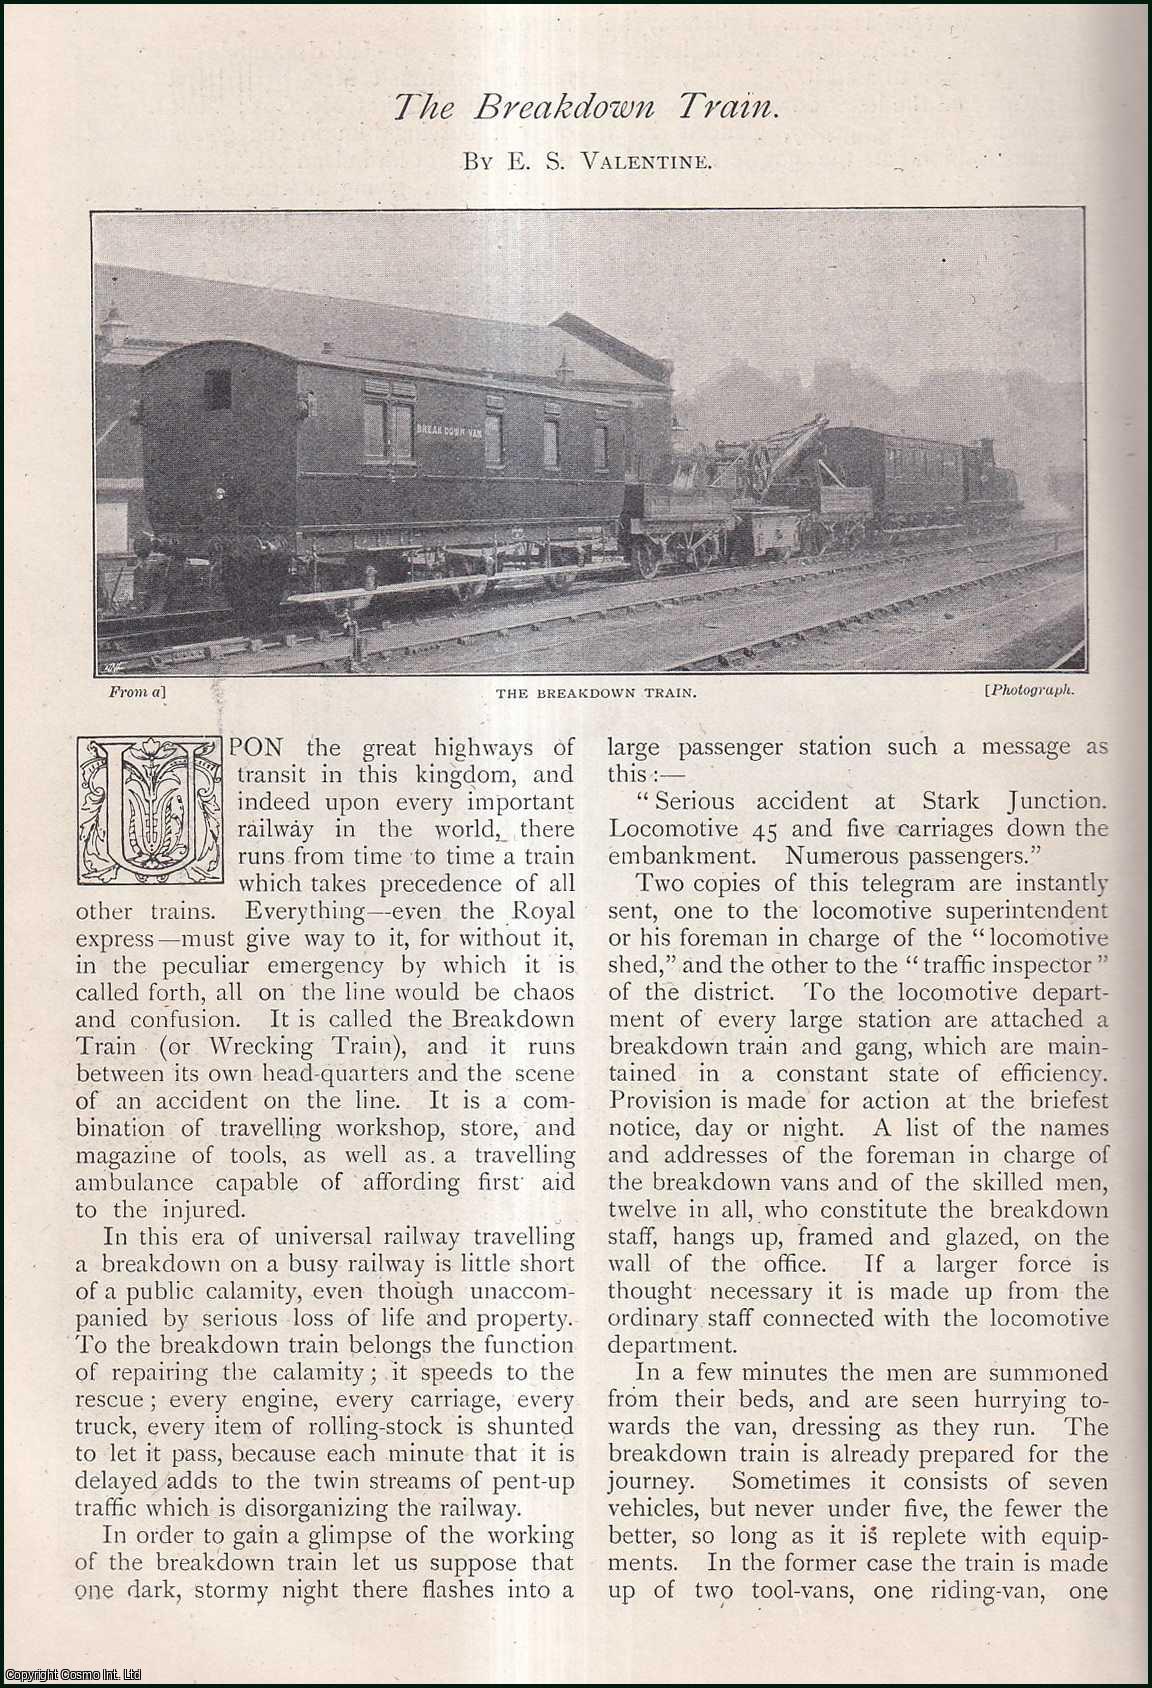 E.S. Valentine - The Breakdown Train, Wrecking Train. It runs between its own head-quarters & the scene of an accident on the line. An uncommon original article from The Strand Magazine, 1901.